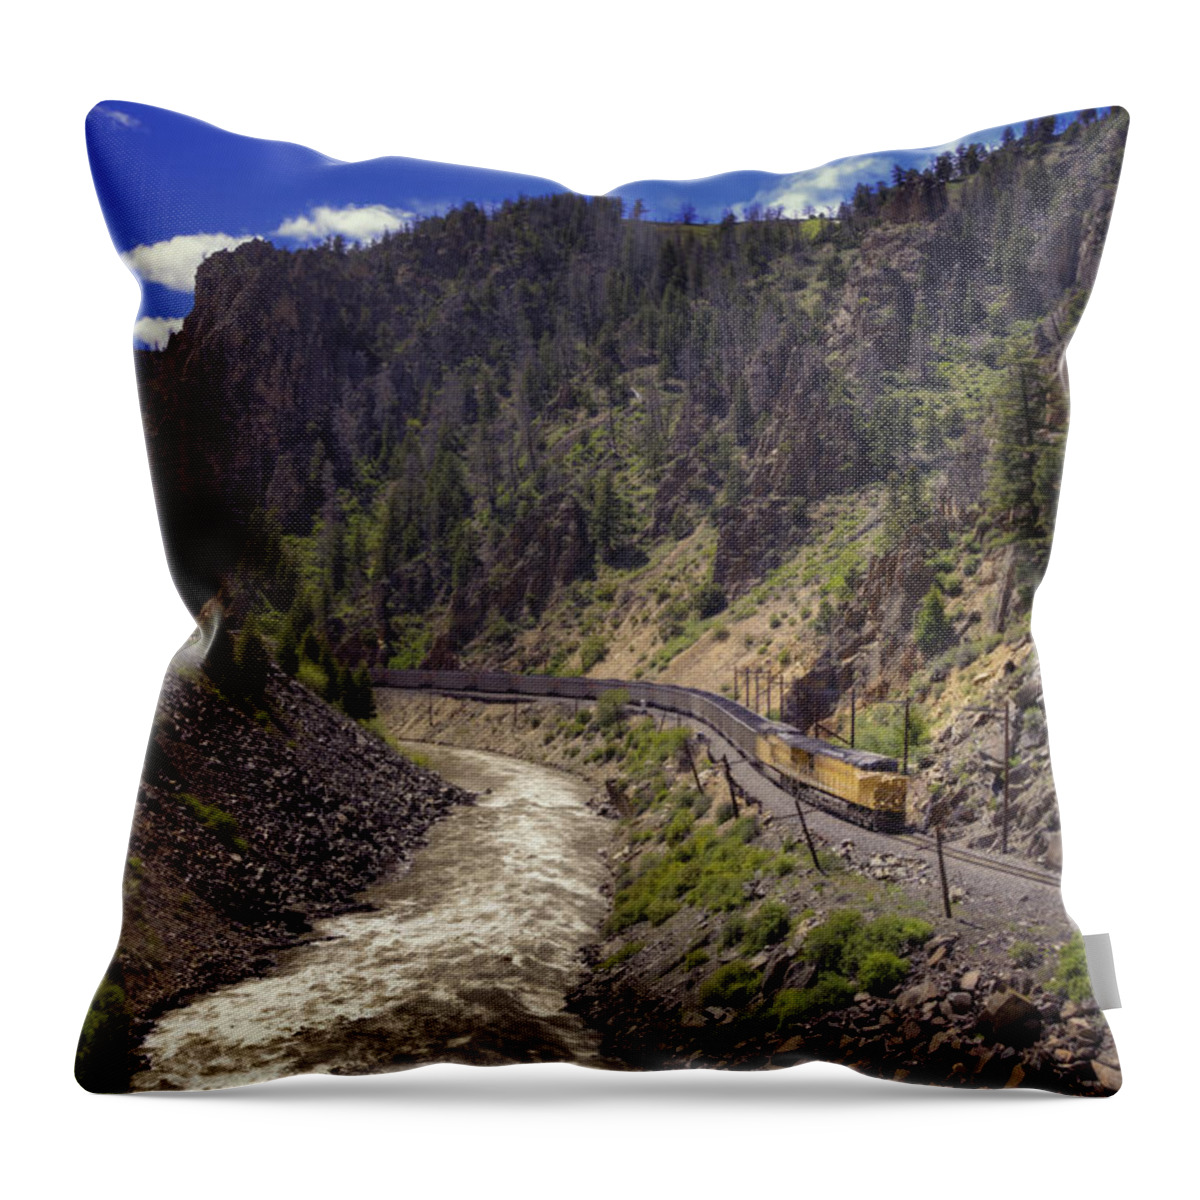 Train Throw Pillow featuring the photograph Retro by Joan Carroll